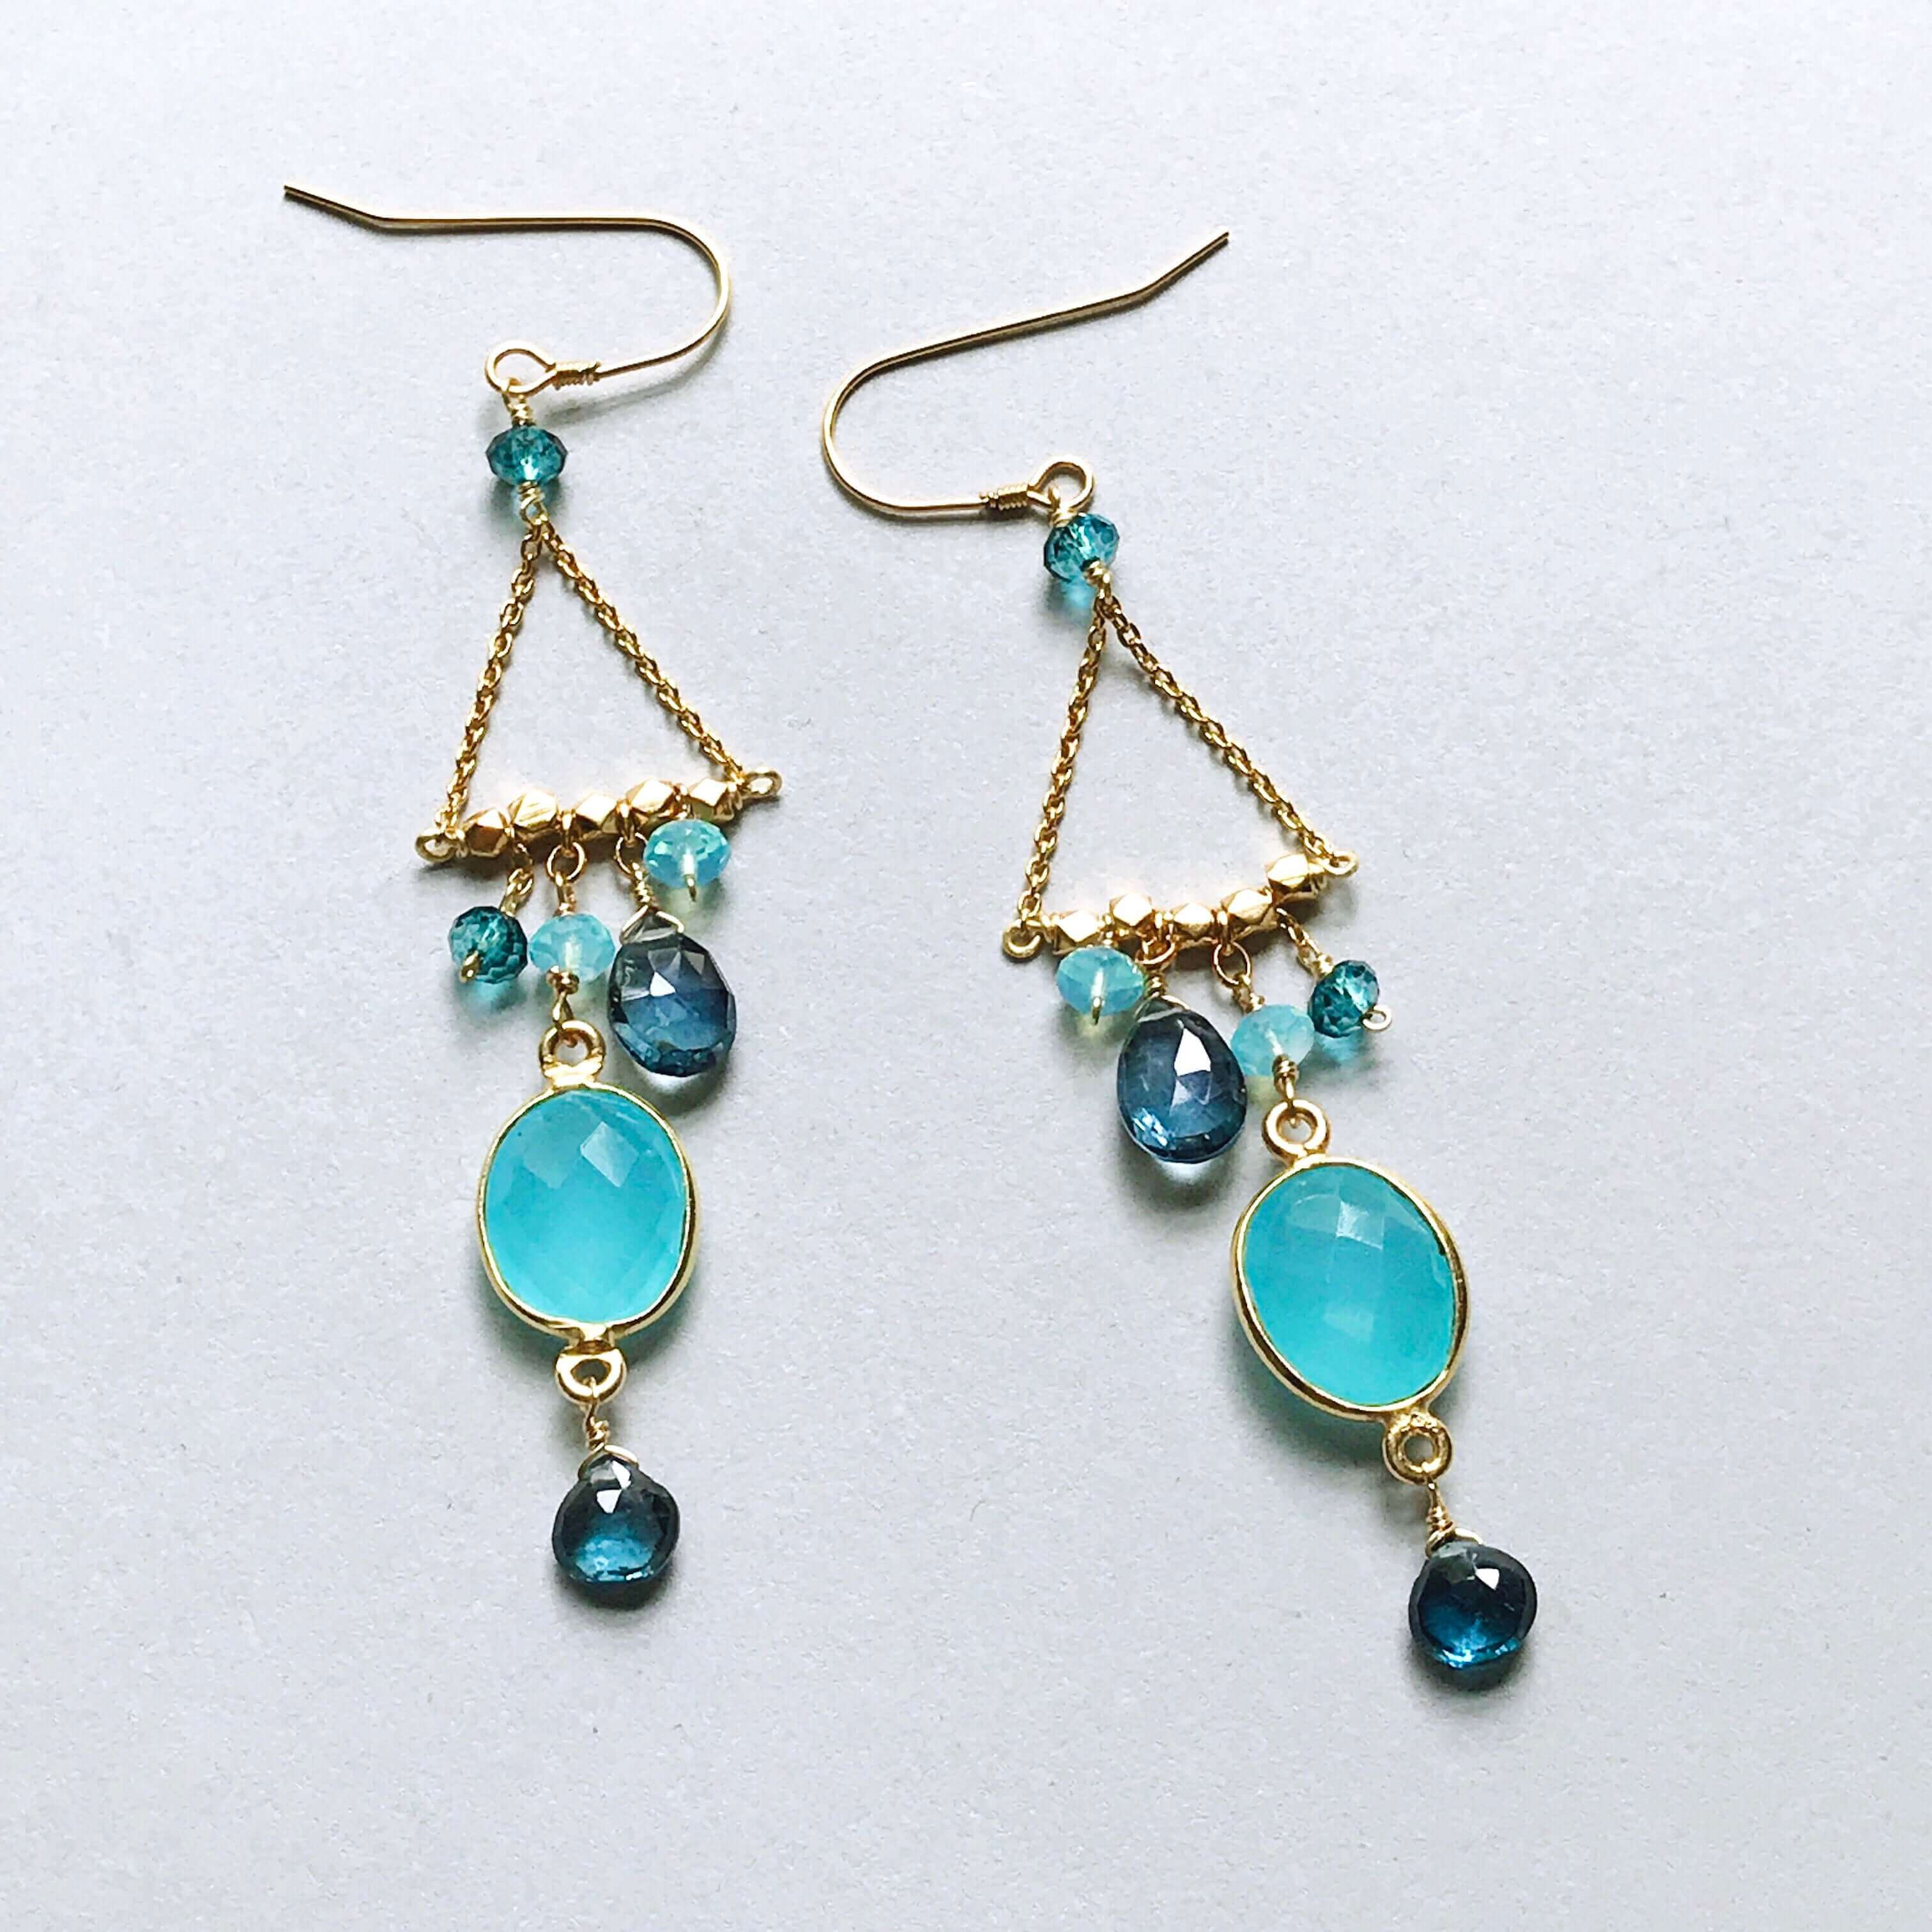 Bezel set blue chalcedony gemstones surrounded by faceted London Blue quartz accent stones Gold  Earrings 